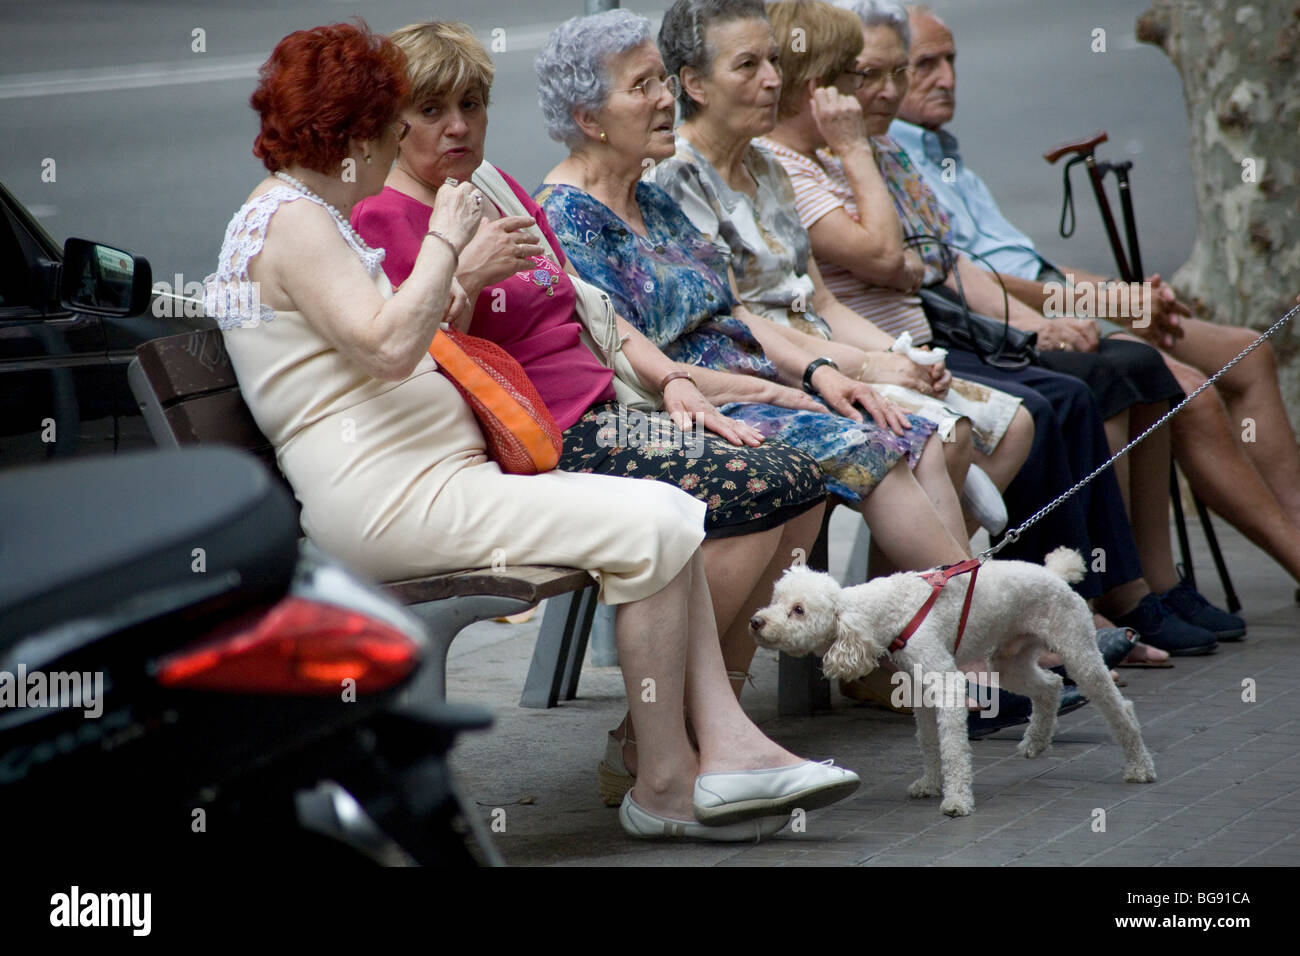 CURIOUS DOG, SENIORS, FRIENDS, TOGETHER: A curious dog sniffs ankles as seniors take it easy during siesta in Raval Barcelona Catalonia Spain Stock Photo